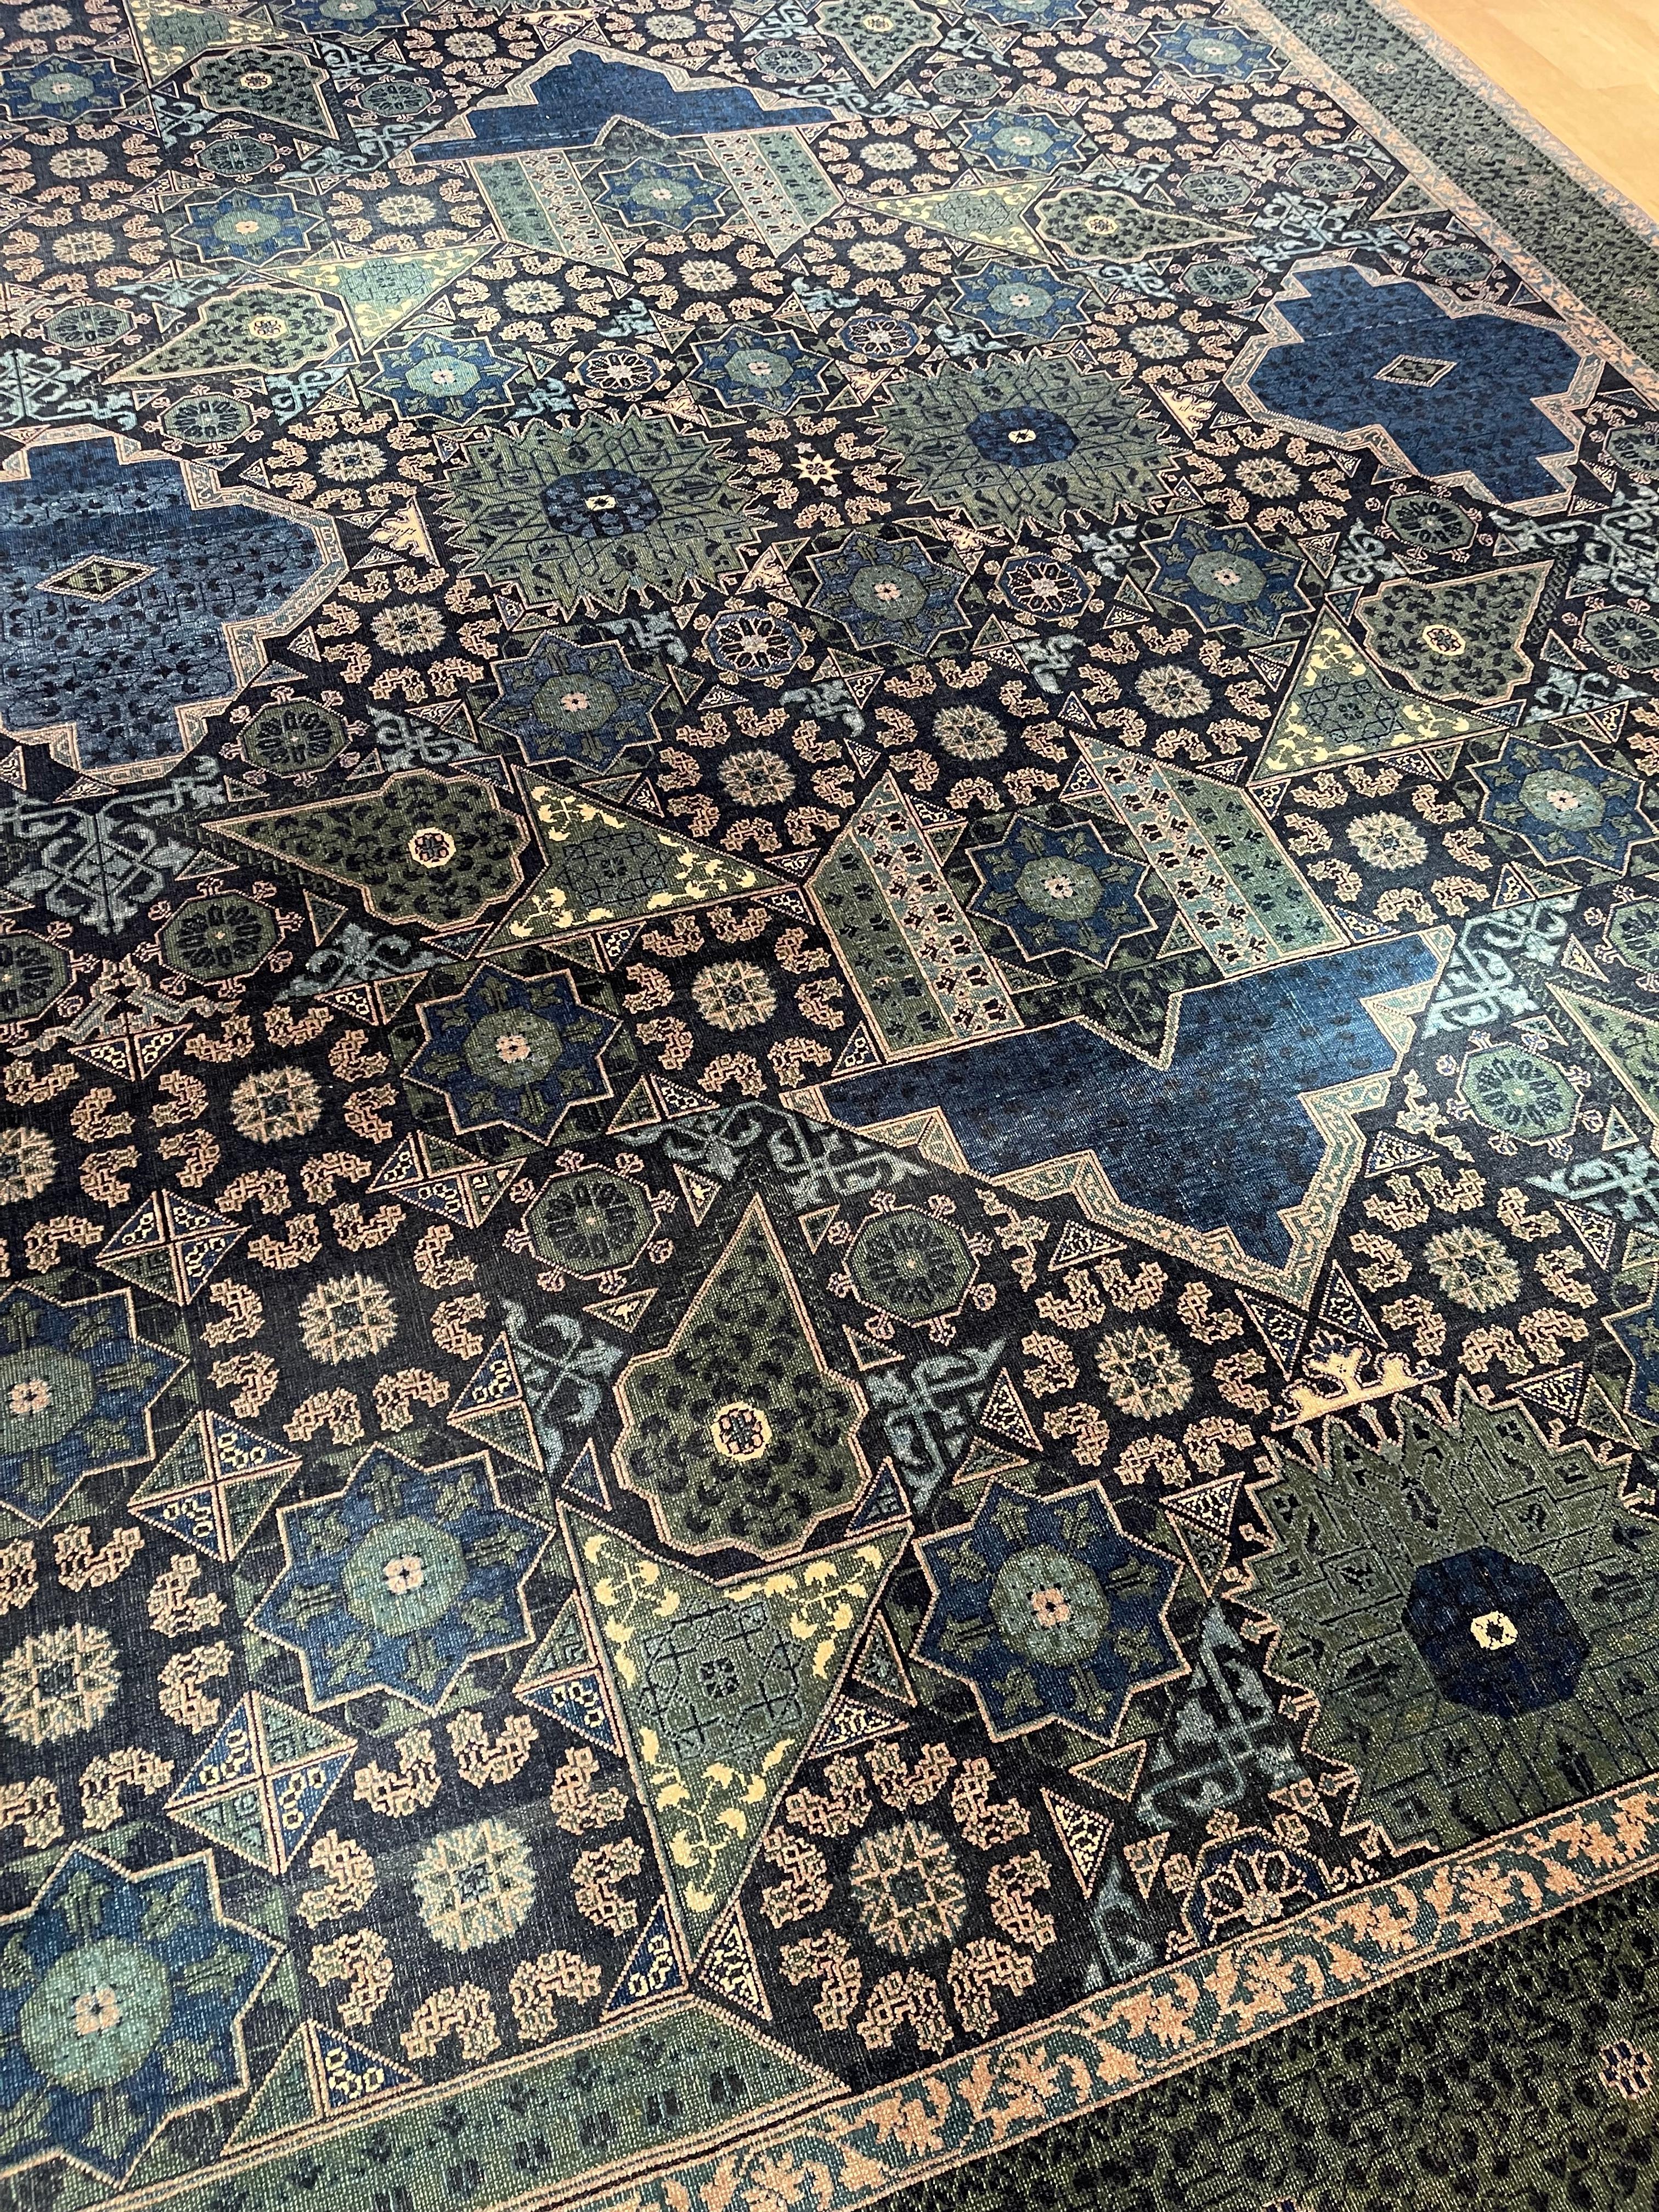 The source of the rug comes from the book Völker, Angela, Die orientalischen Knüpfteppiche das MAK, Vienna: Böhlau, 2001: 42–5. This rug with the central star was designed in the early 16th century rug by Mamluk Sultane of Cairo, Egypt. It is